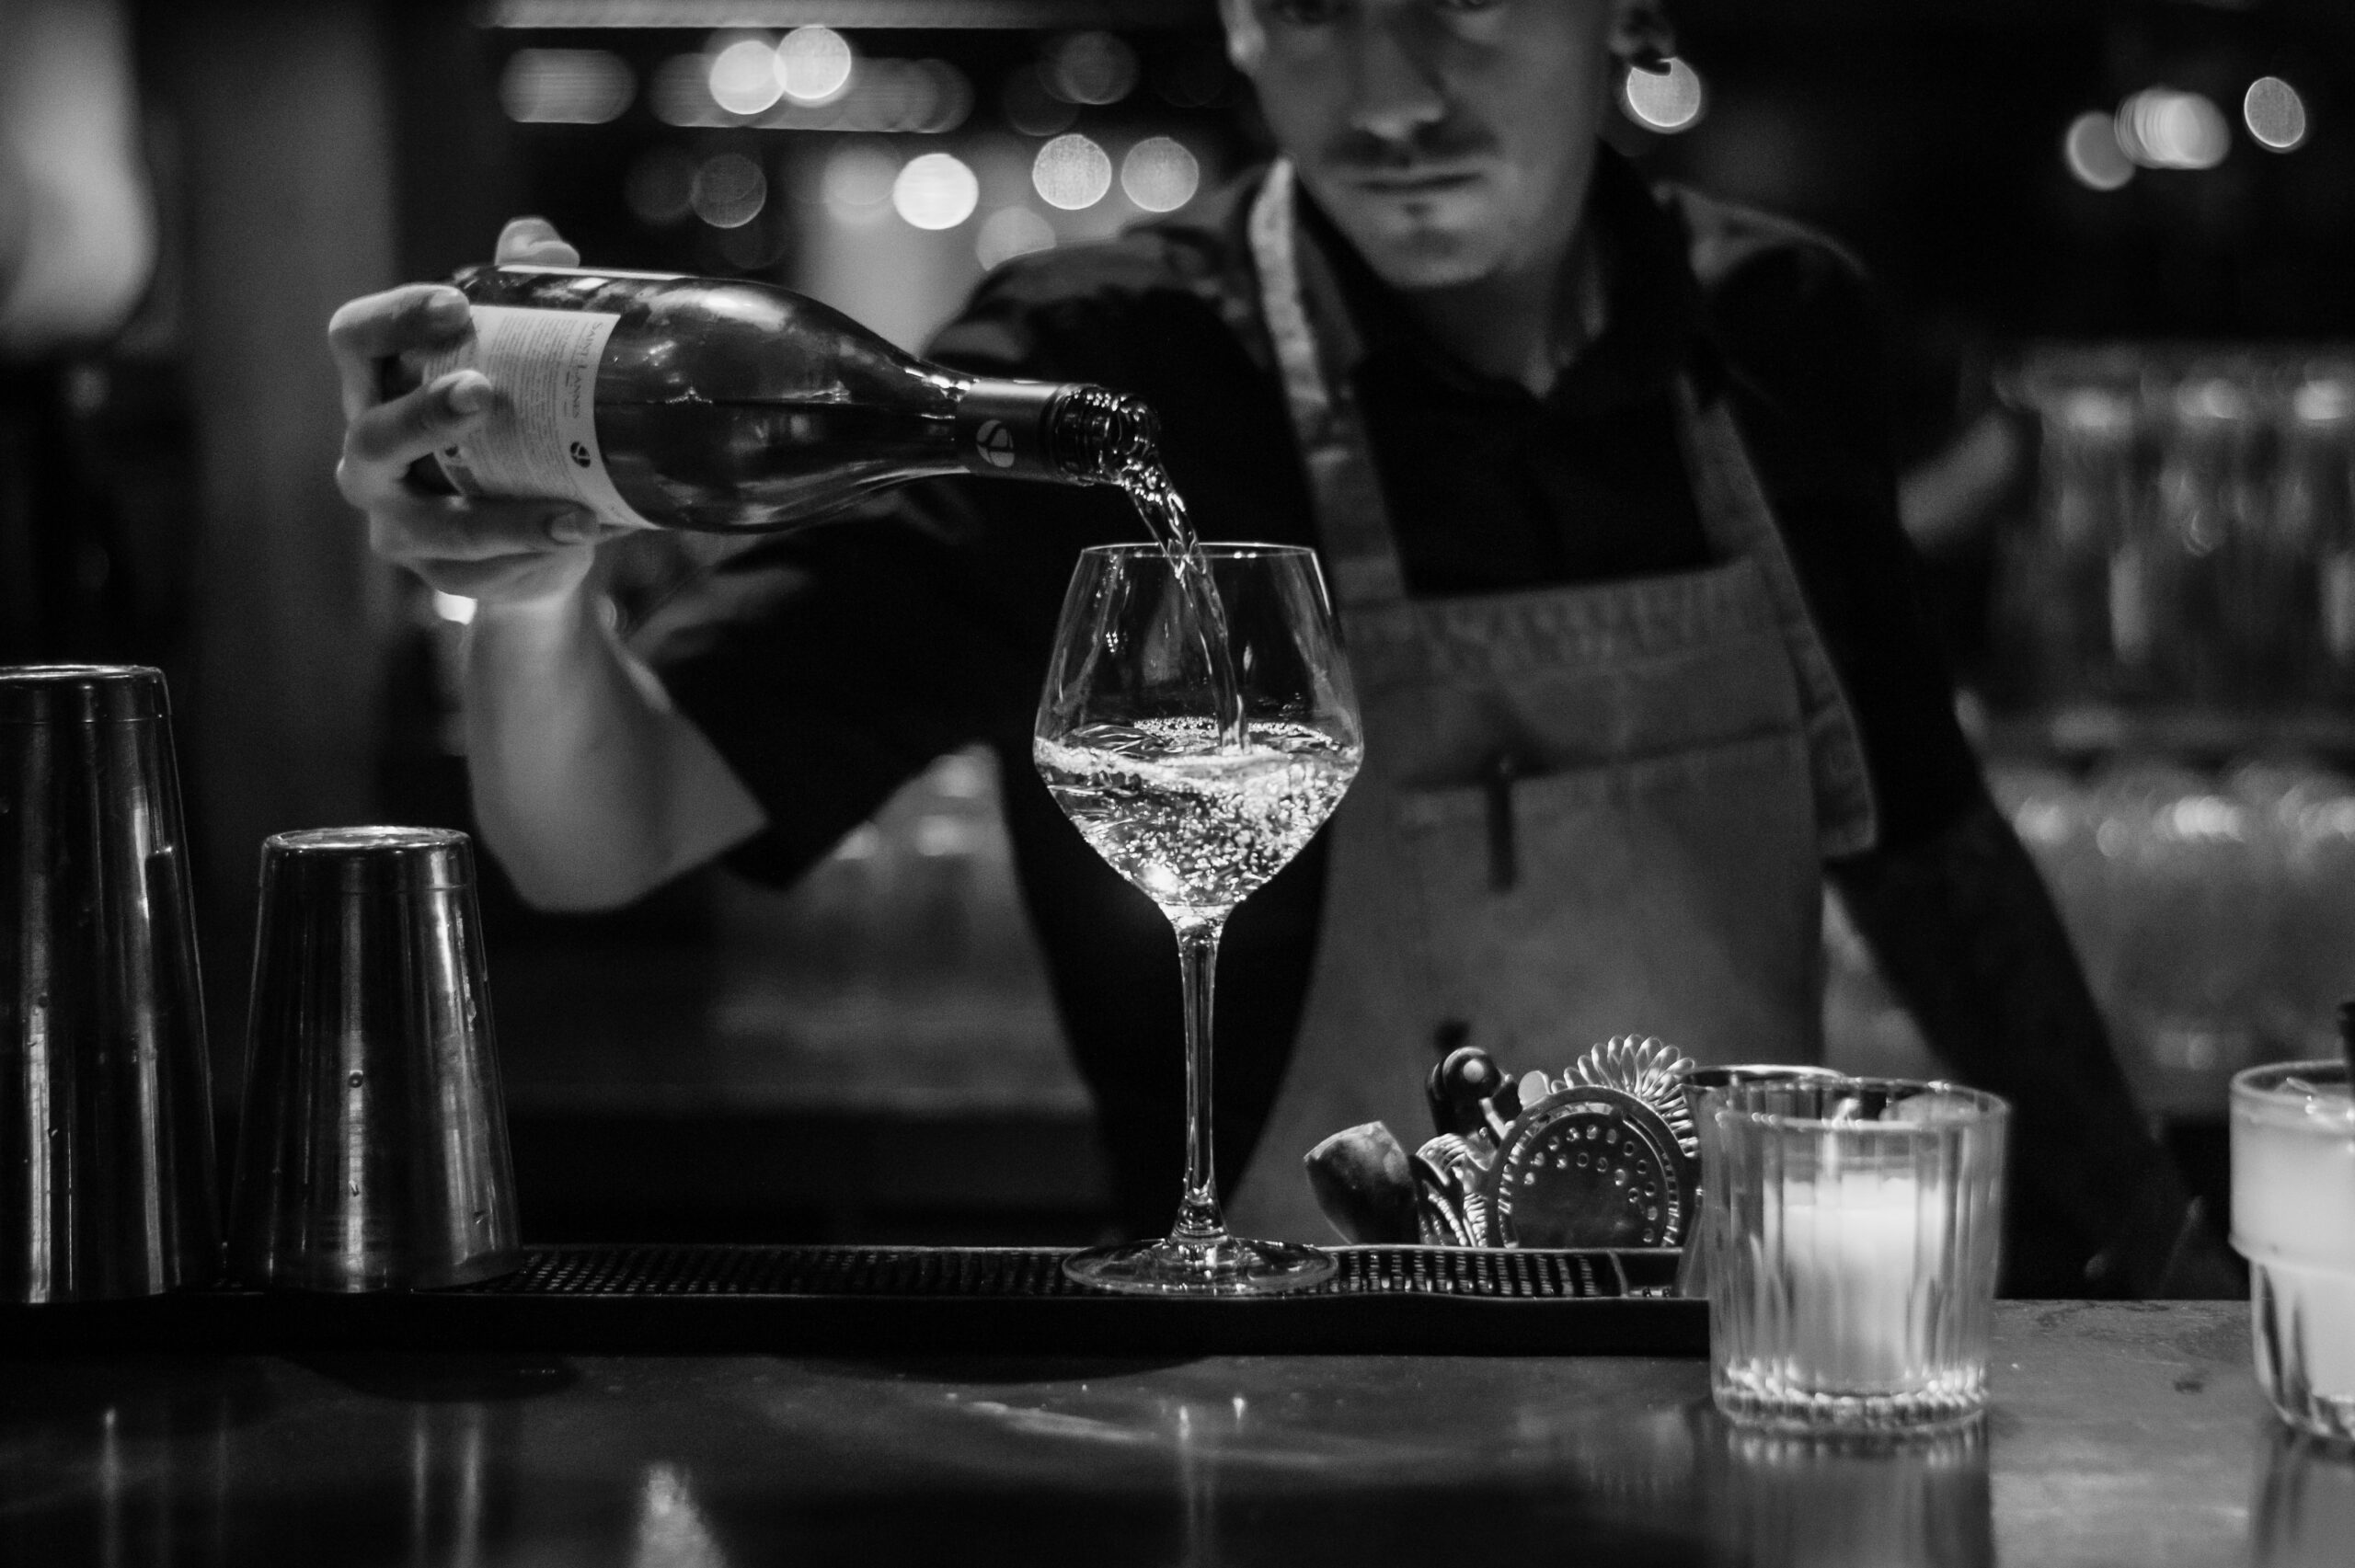 A black and white shot of a wine being poured